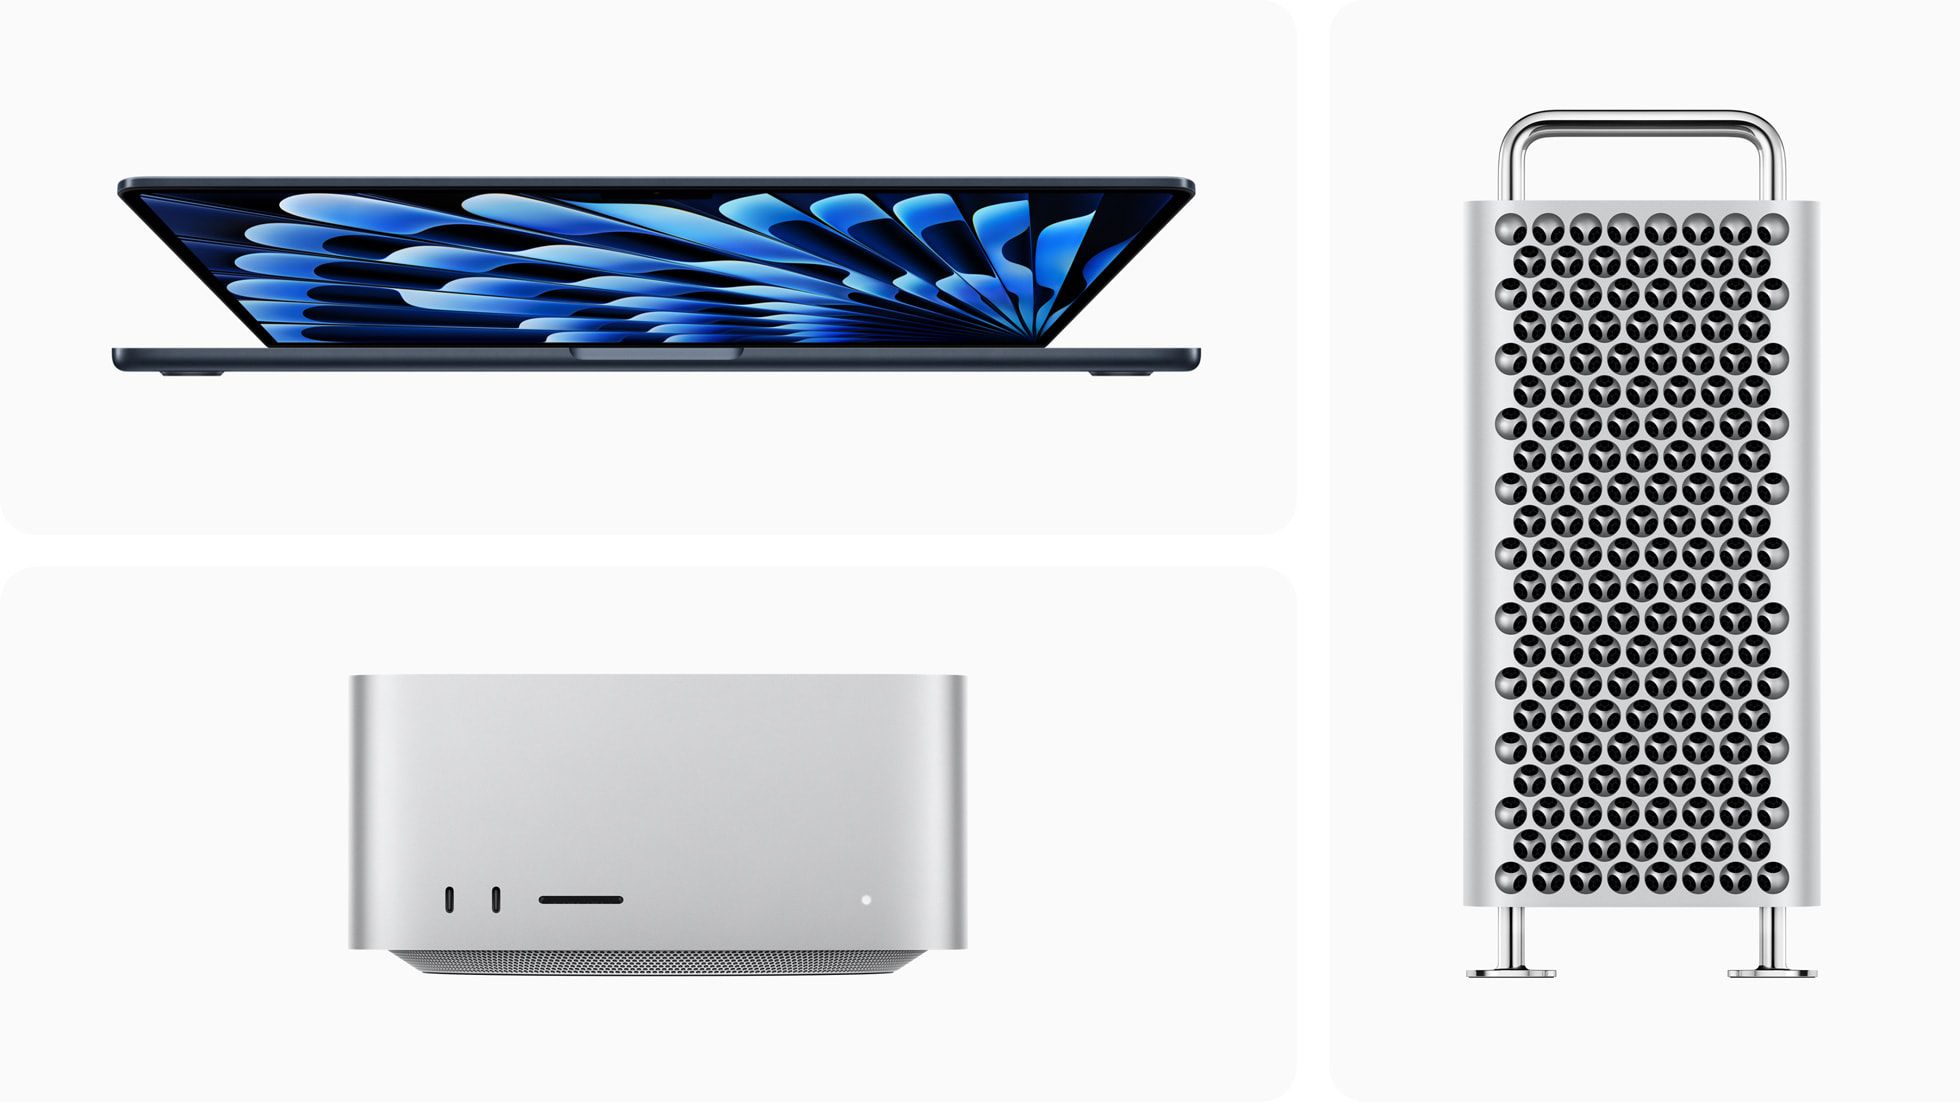 Upgrade Your Older Mac Or PC To The Latest And Fastest Wi-Fi 6E Standard